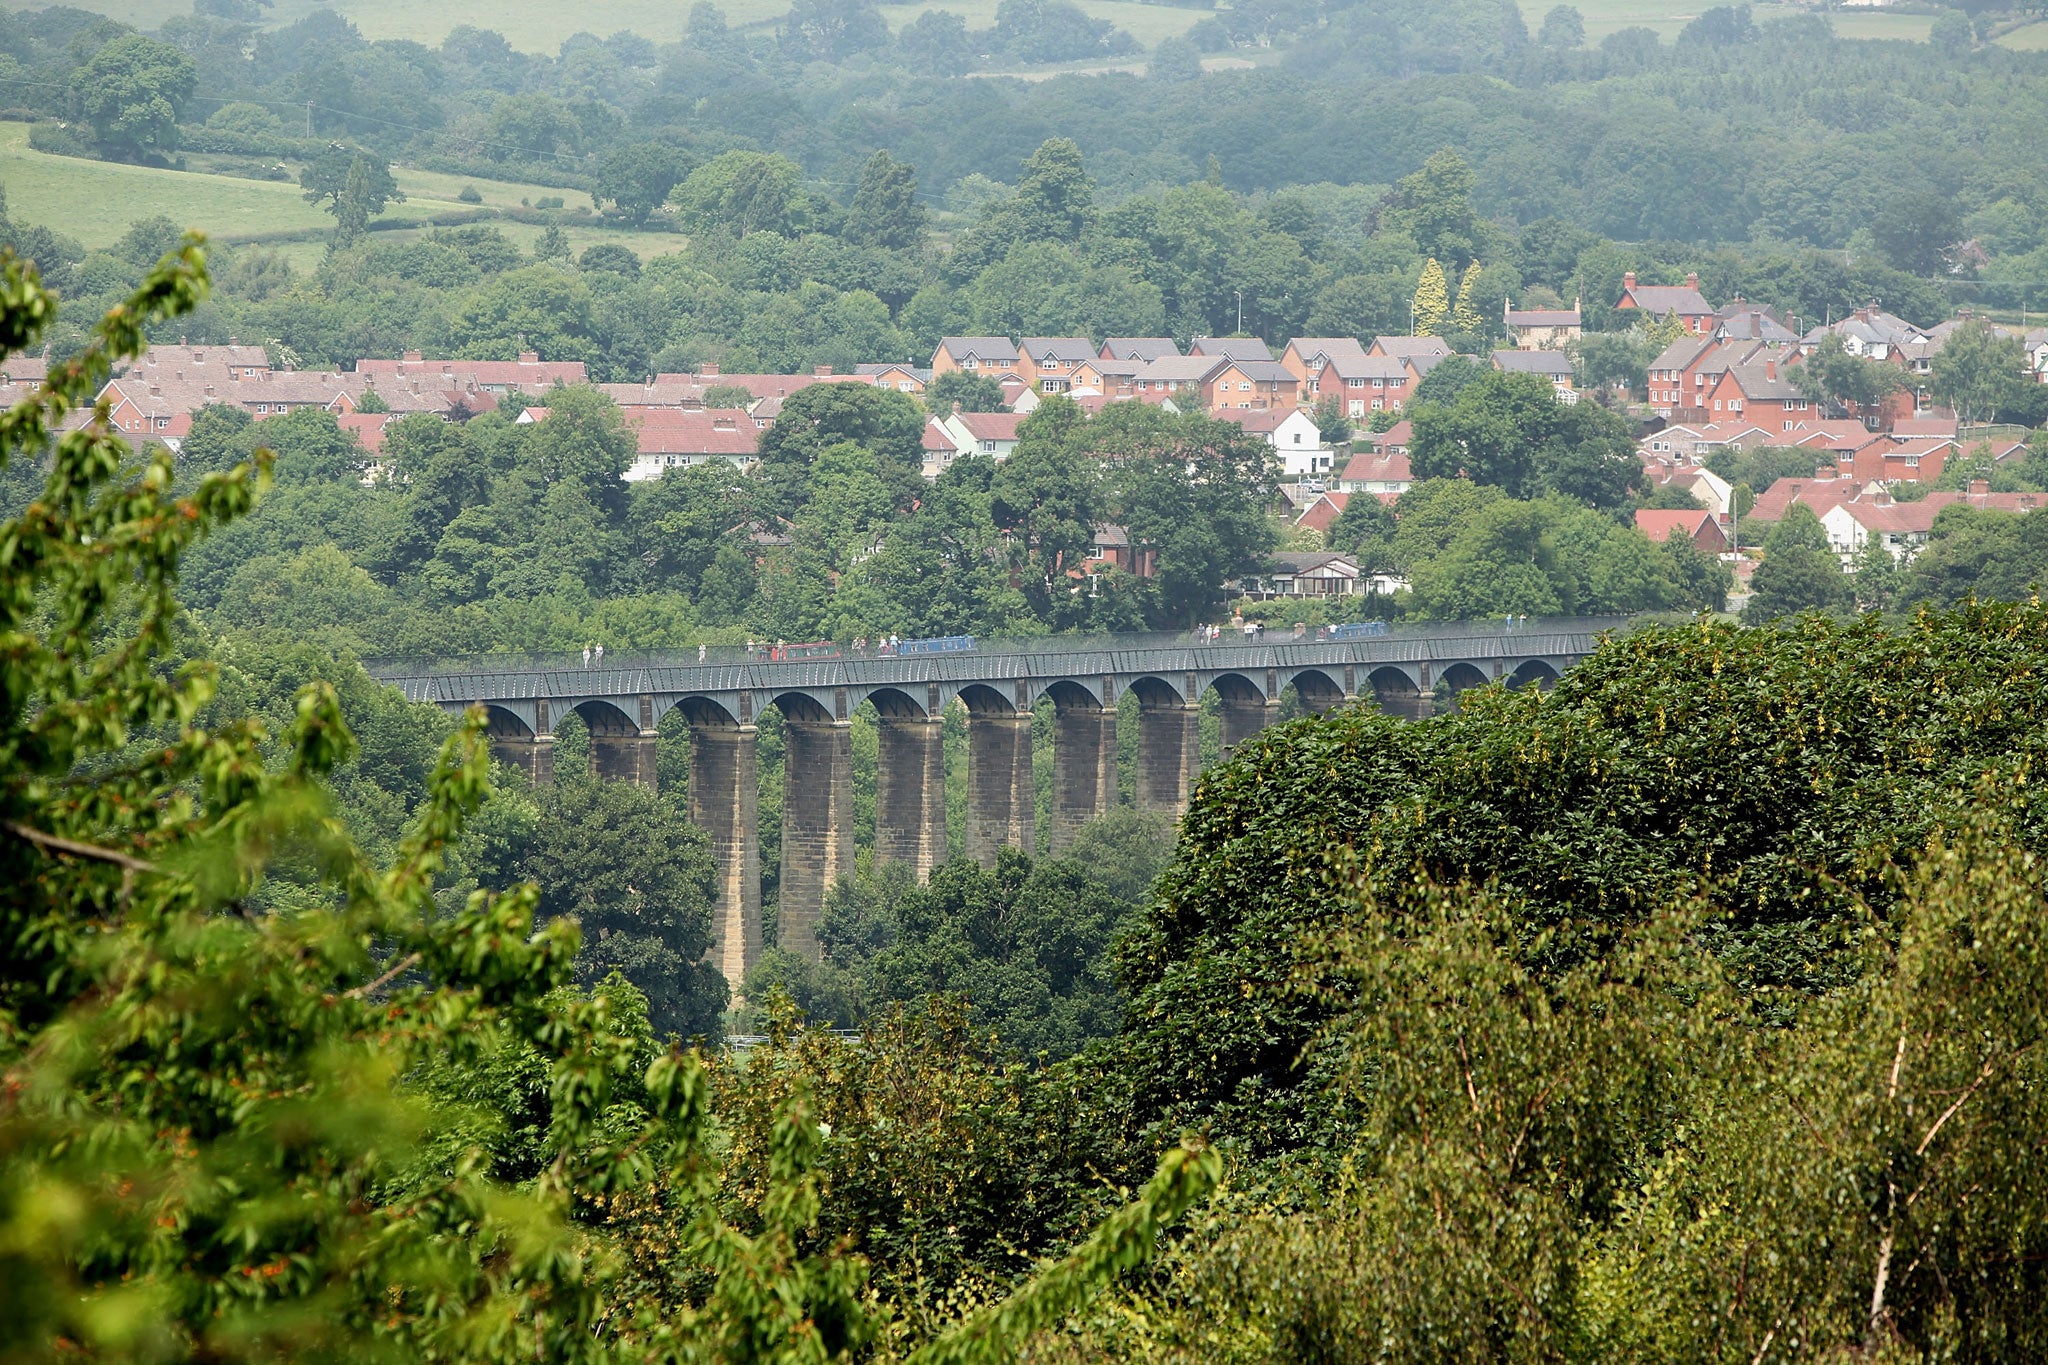 The Pontcysyllte Aqueduct and Canal in north-east Wales was declared what in 2009?